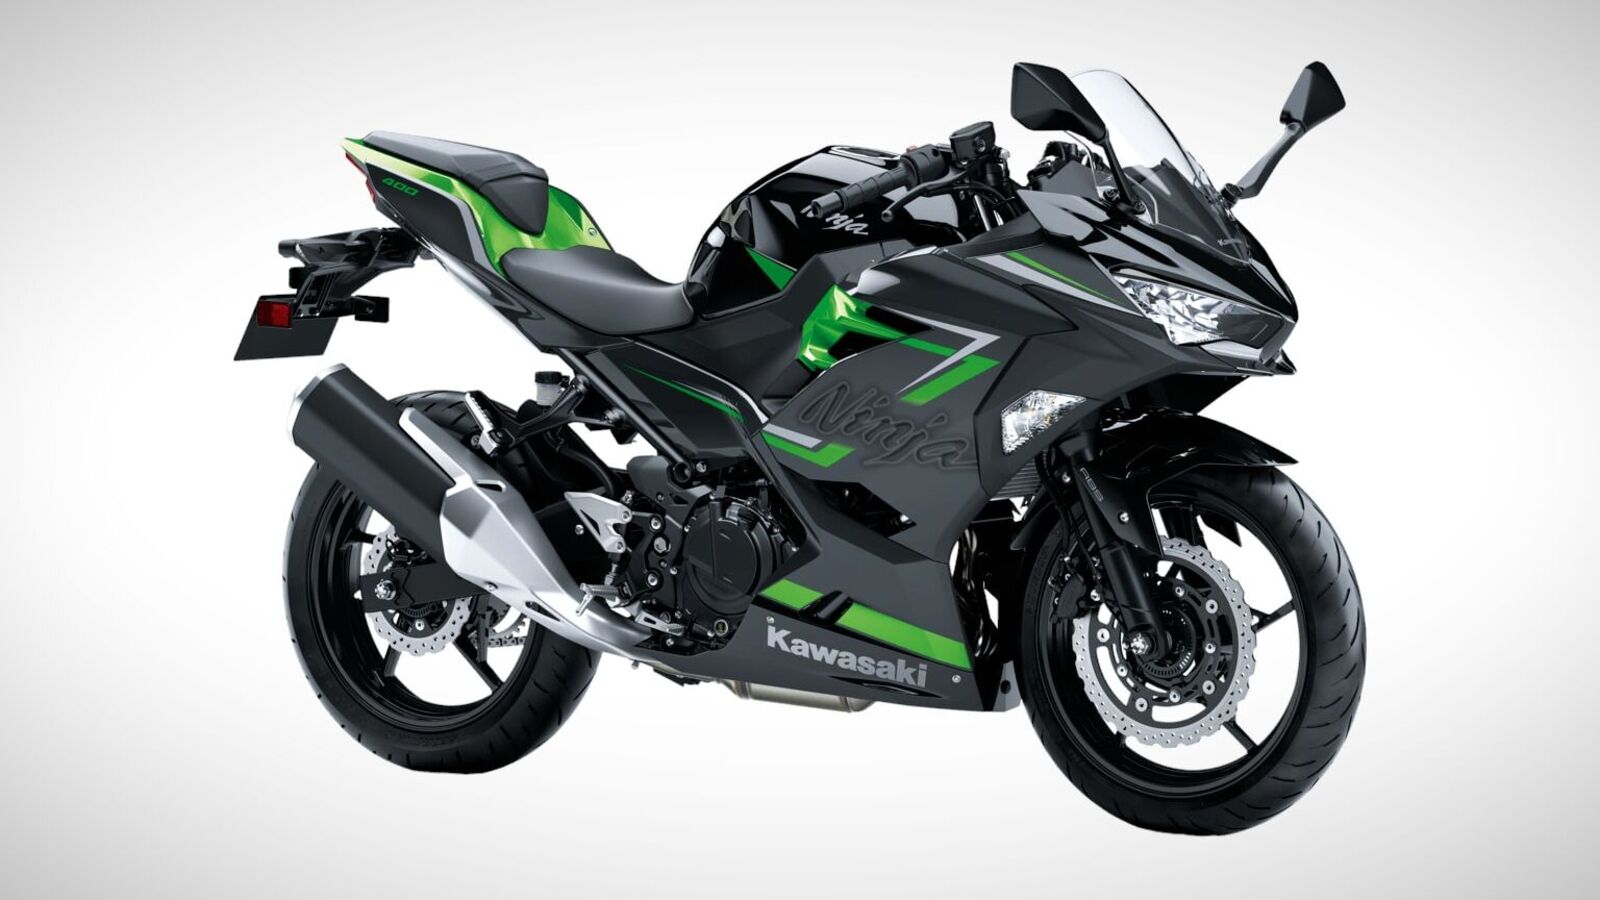 Check out the offers on Kawasaki motorcycles – HT Auto